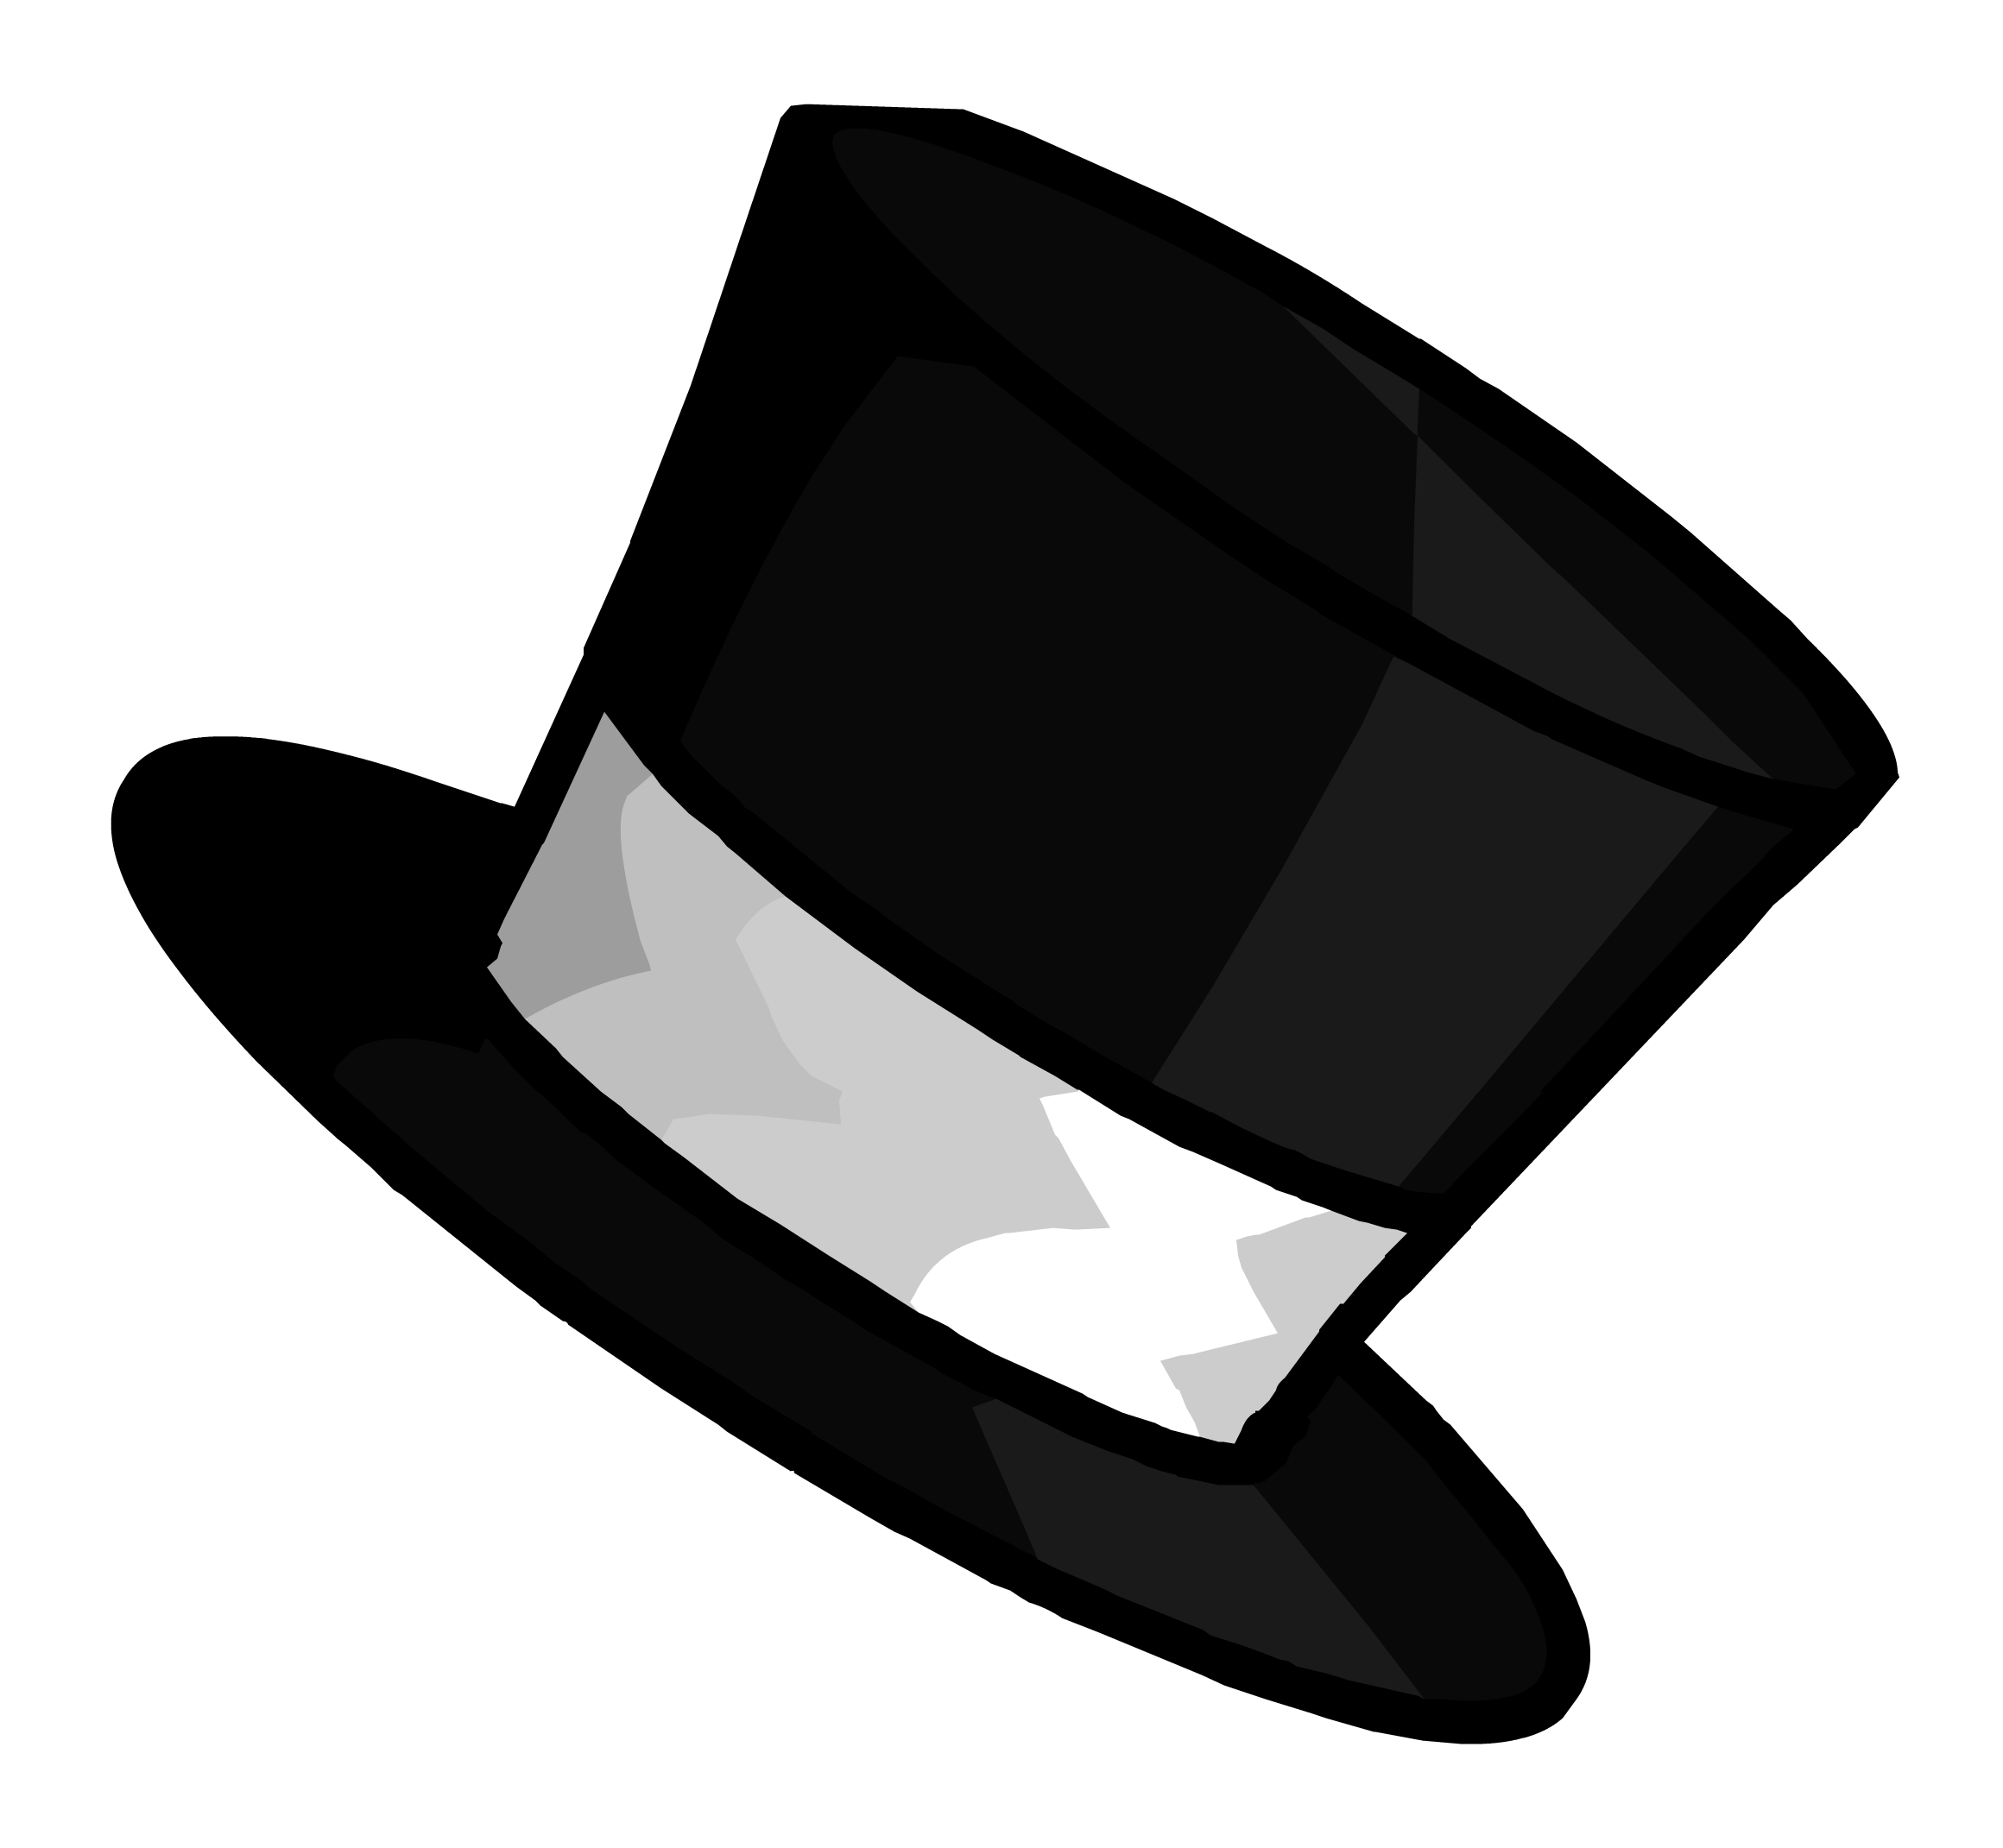 Top Hat Pin - Club Penguin Wiki - The free, editable ...